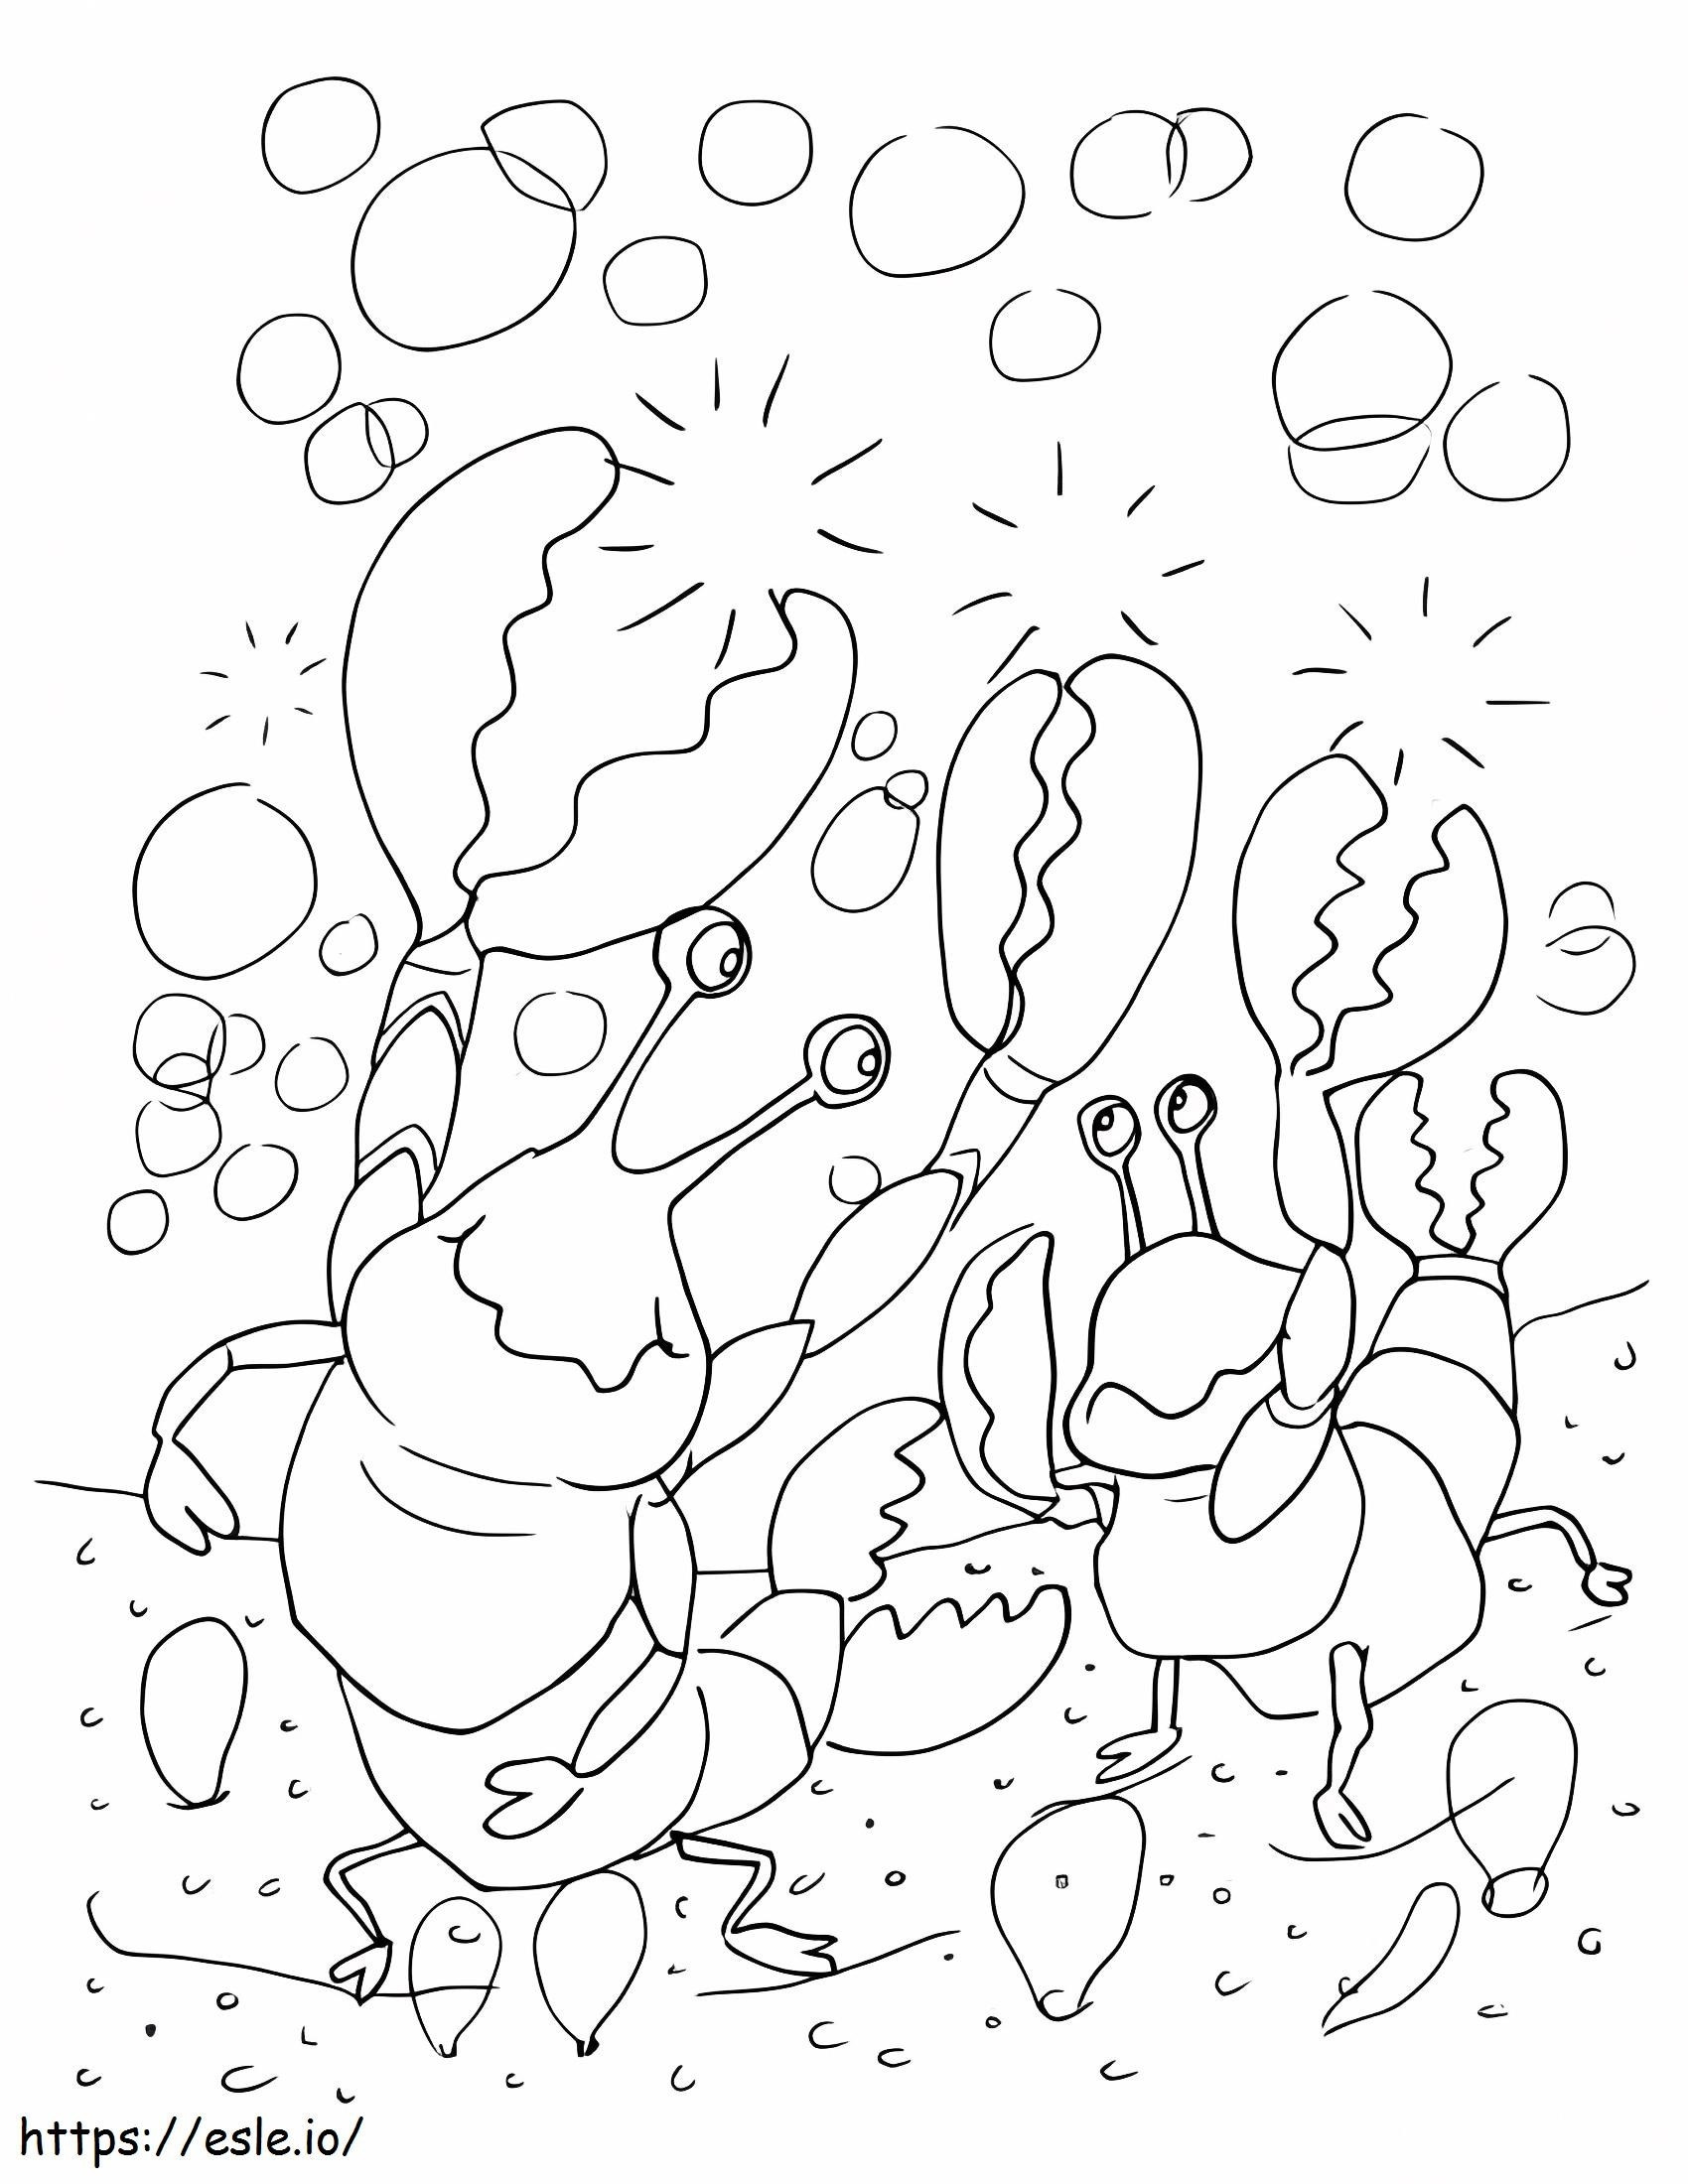 Two Lobsters coloring page